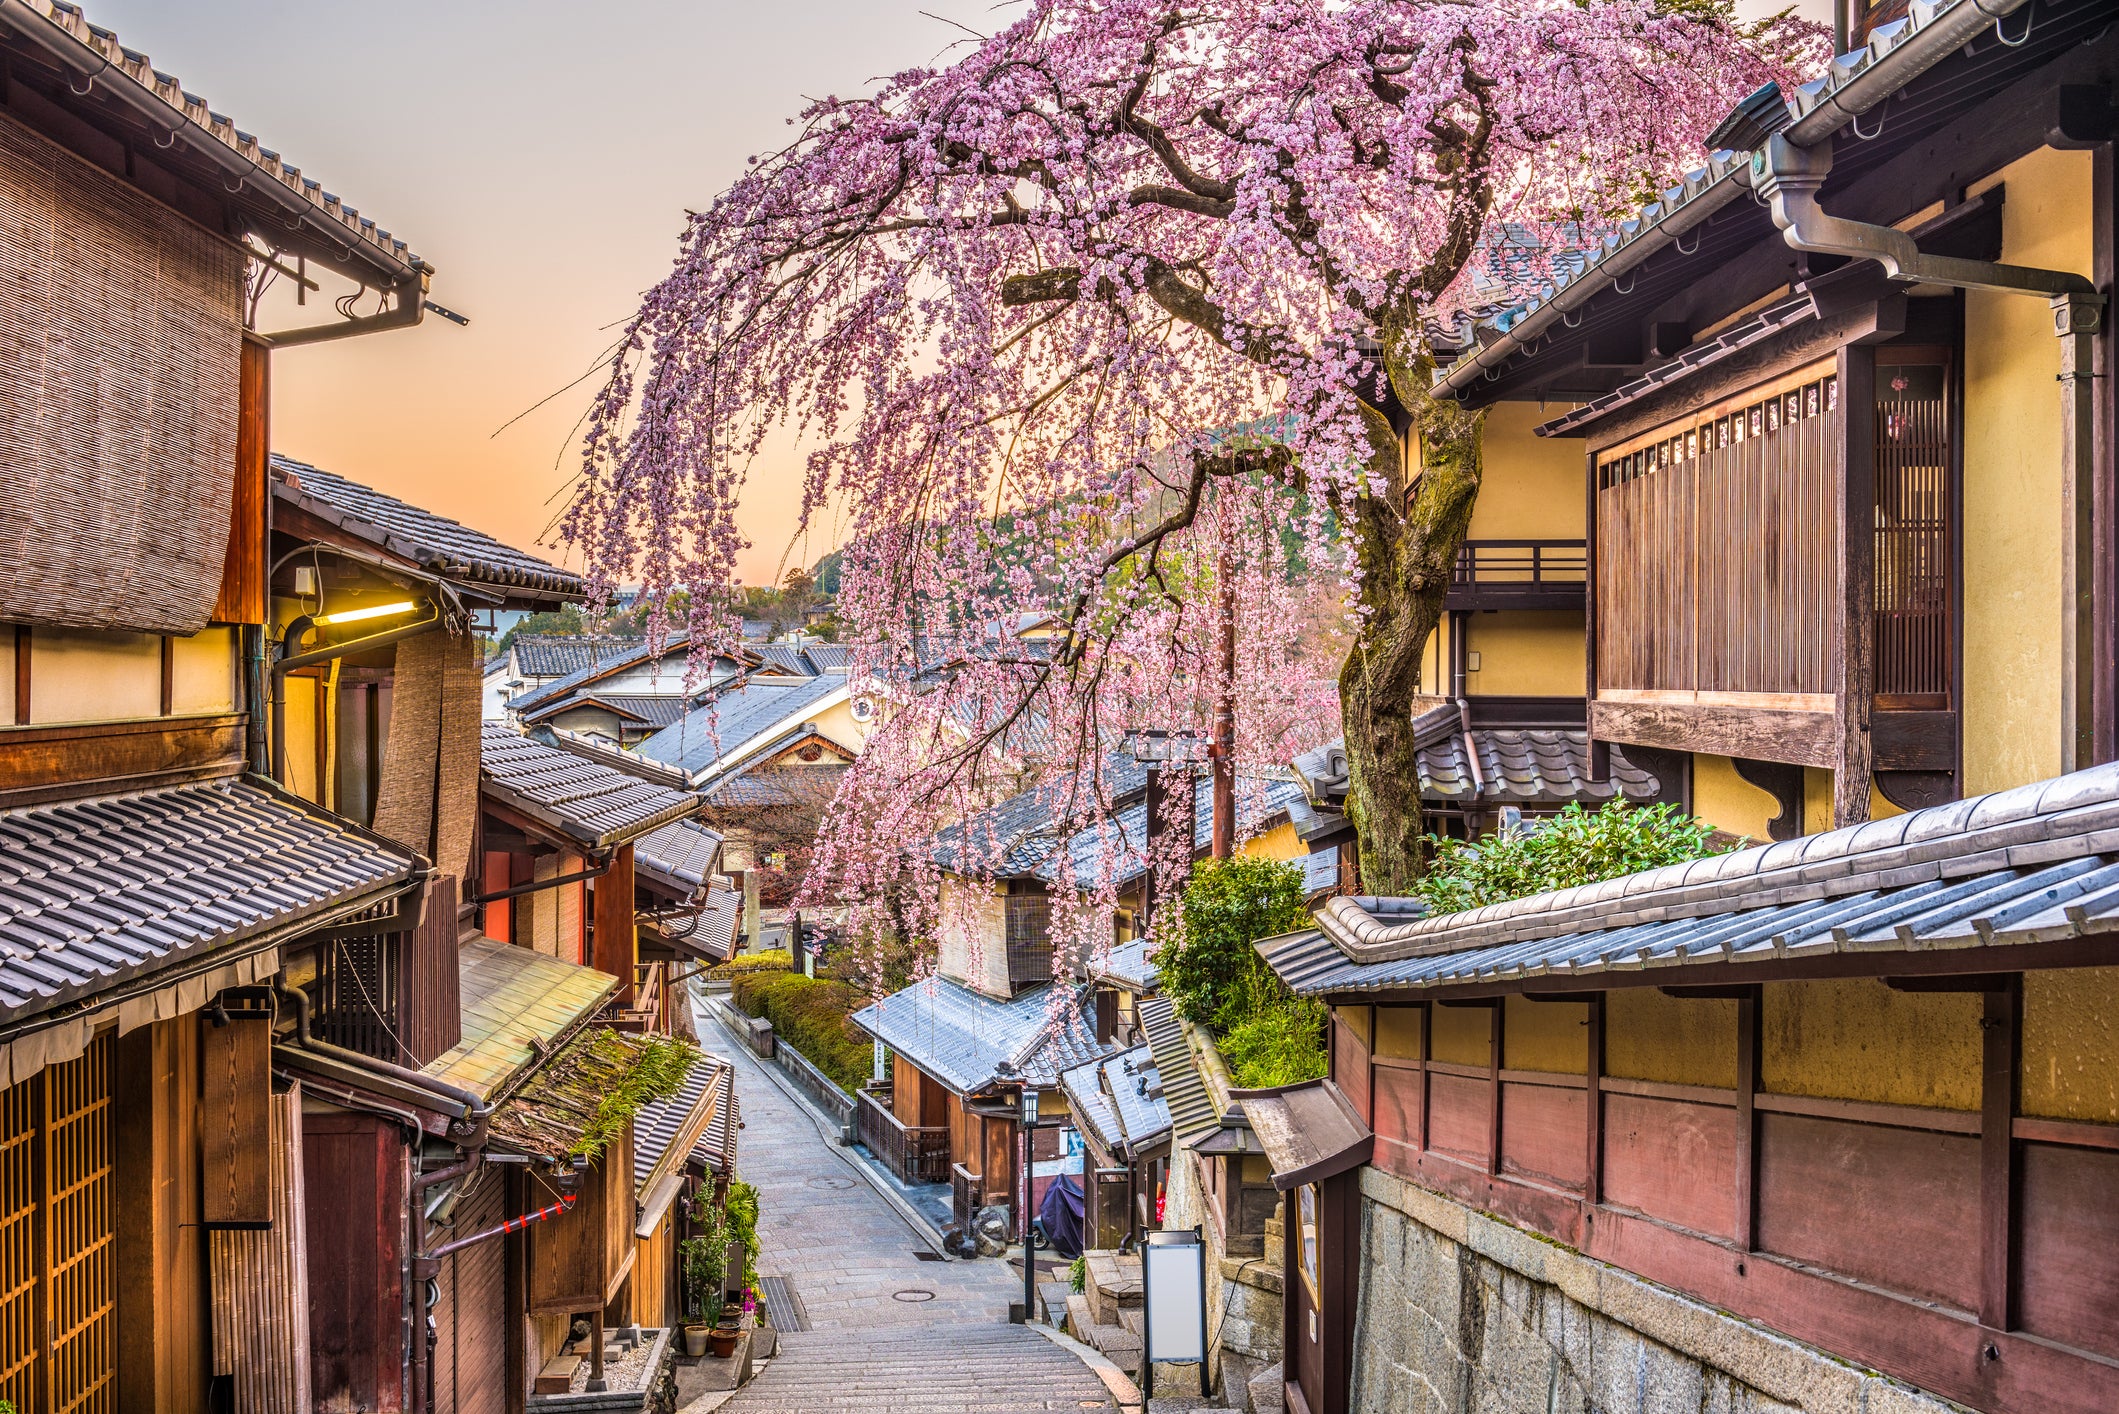 Cherry blossoms enchant Kyoto in the spring